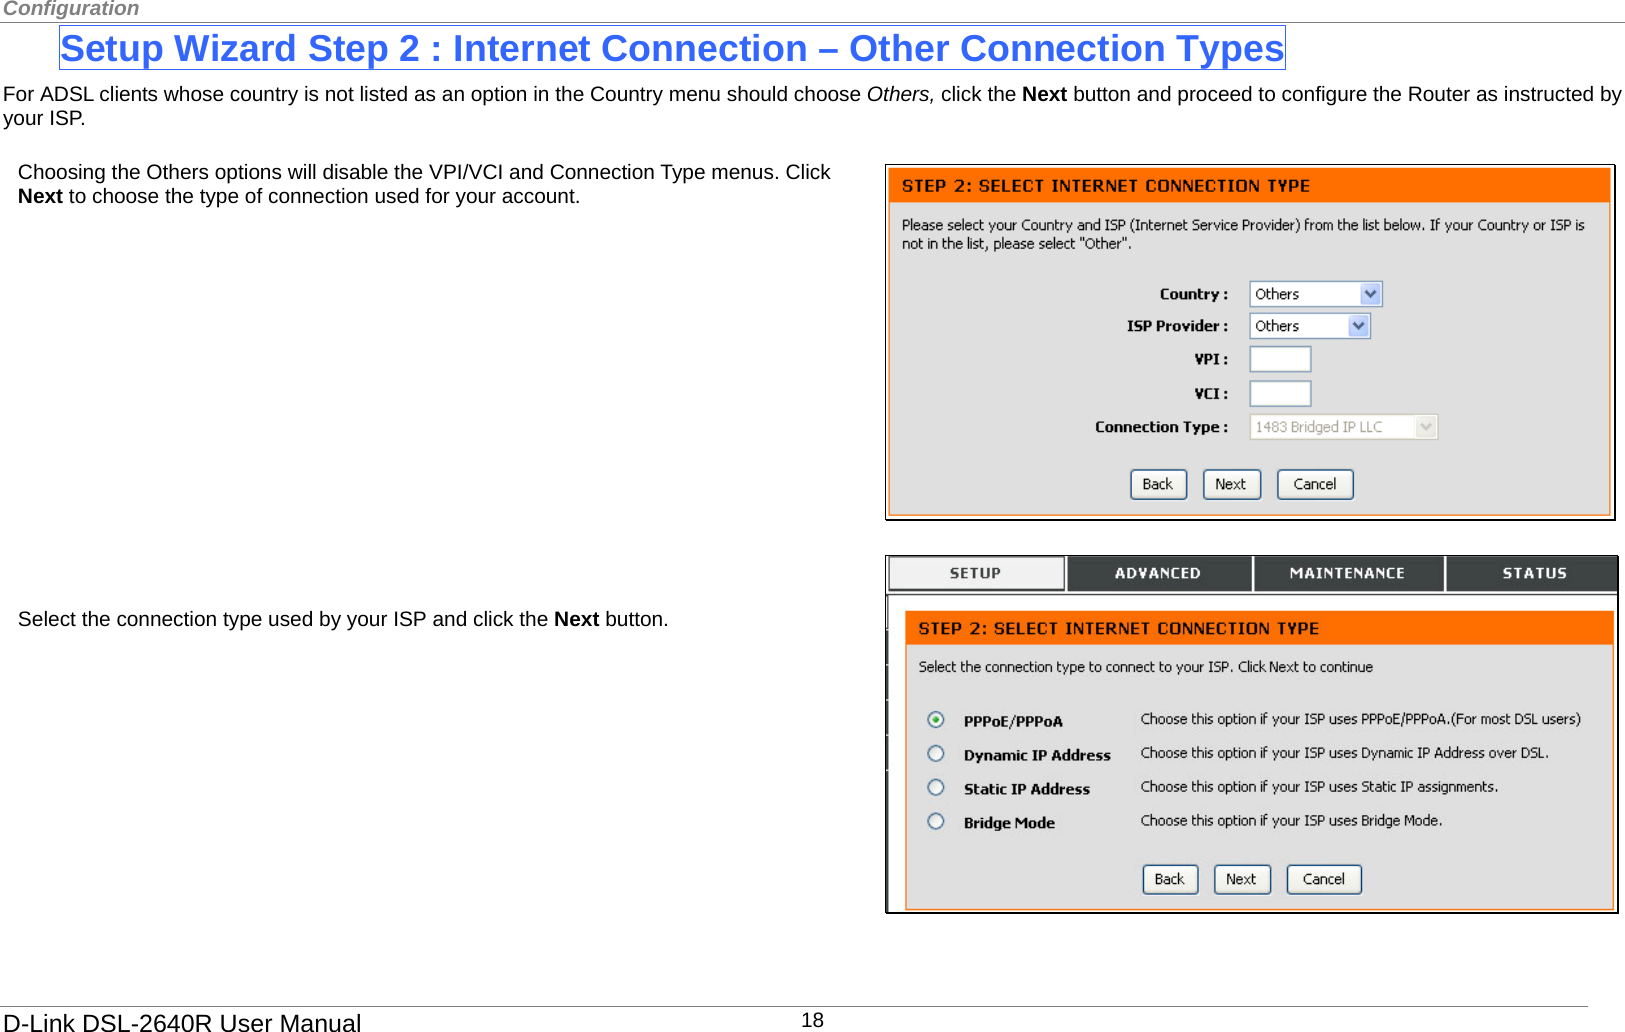 Configuration  Setup Wizard Step 2 : Internet Connection – Other Connection Types For ADSL clients whose country is not listed as an option in the Country menu should choose Others, click the Next button and proceed to configure the Router as instructed by your ISP.       Select the connection type used by your ISP and click the Next button.   Choosing the Others options will disable the VPI/VCI and Connection Type menus. Click Next to choose the type of connection used for your account.                D-Link DSL-2640R User Manual 18